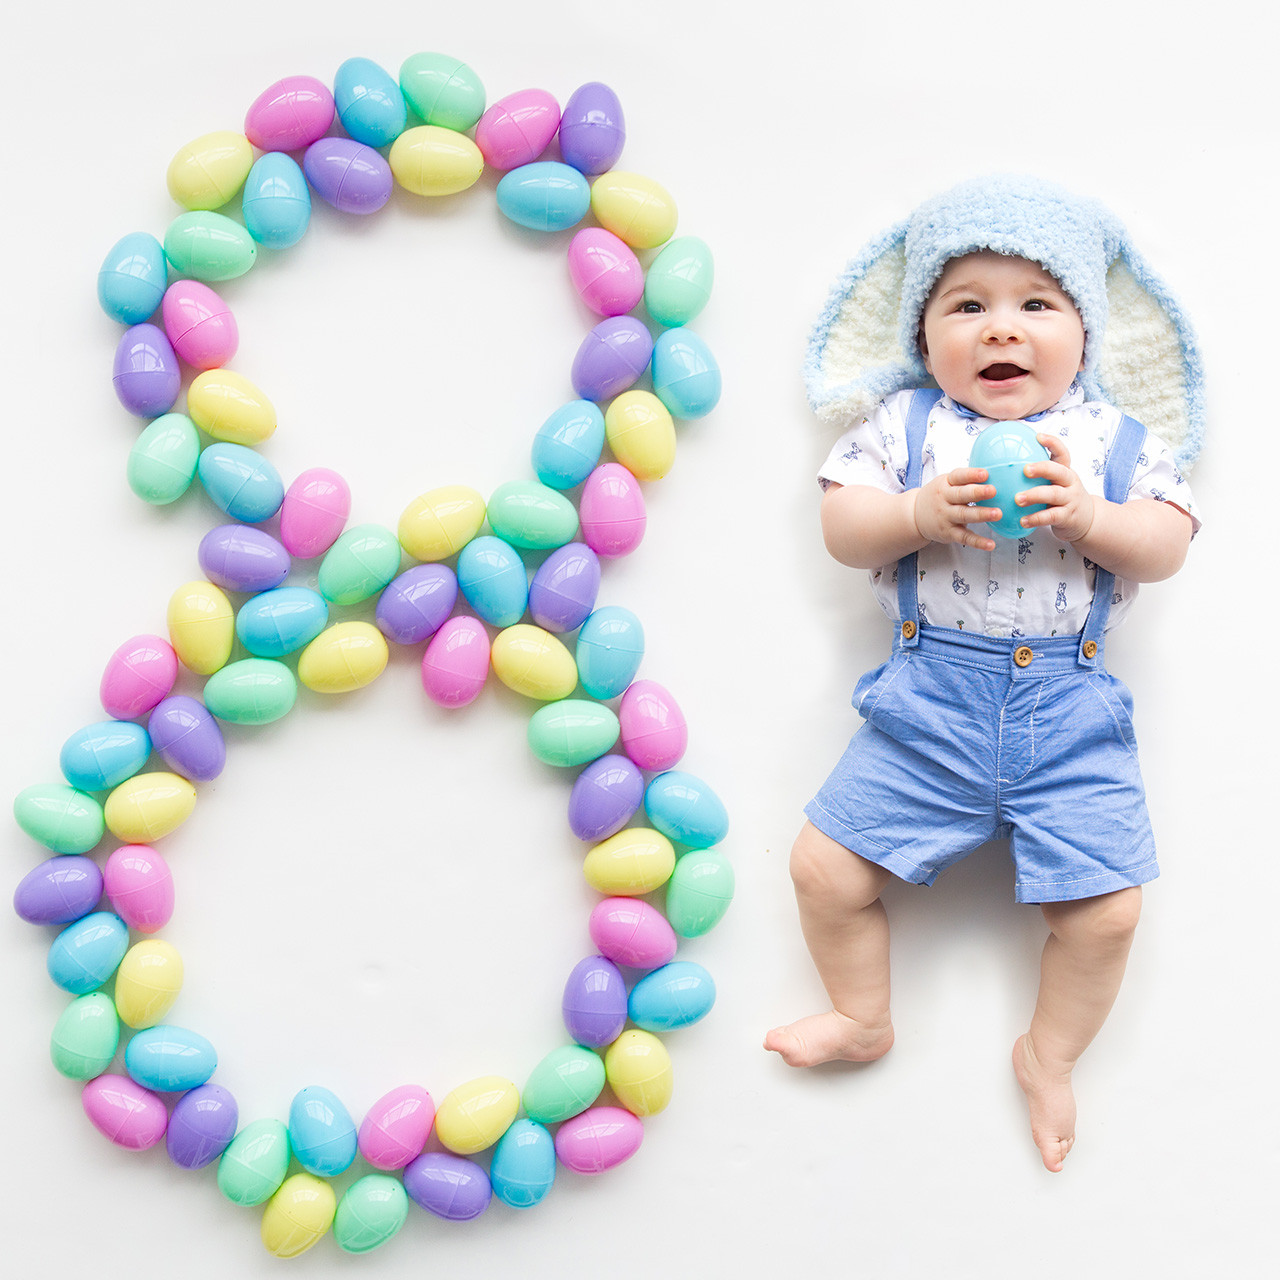 Baby Easter Photo Ideas
 Anna with Love graphy